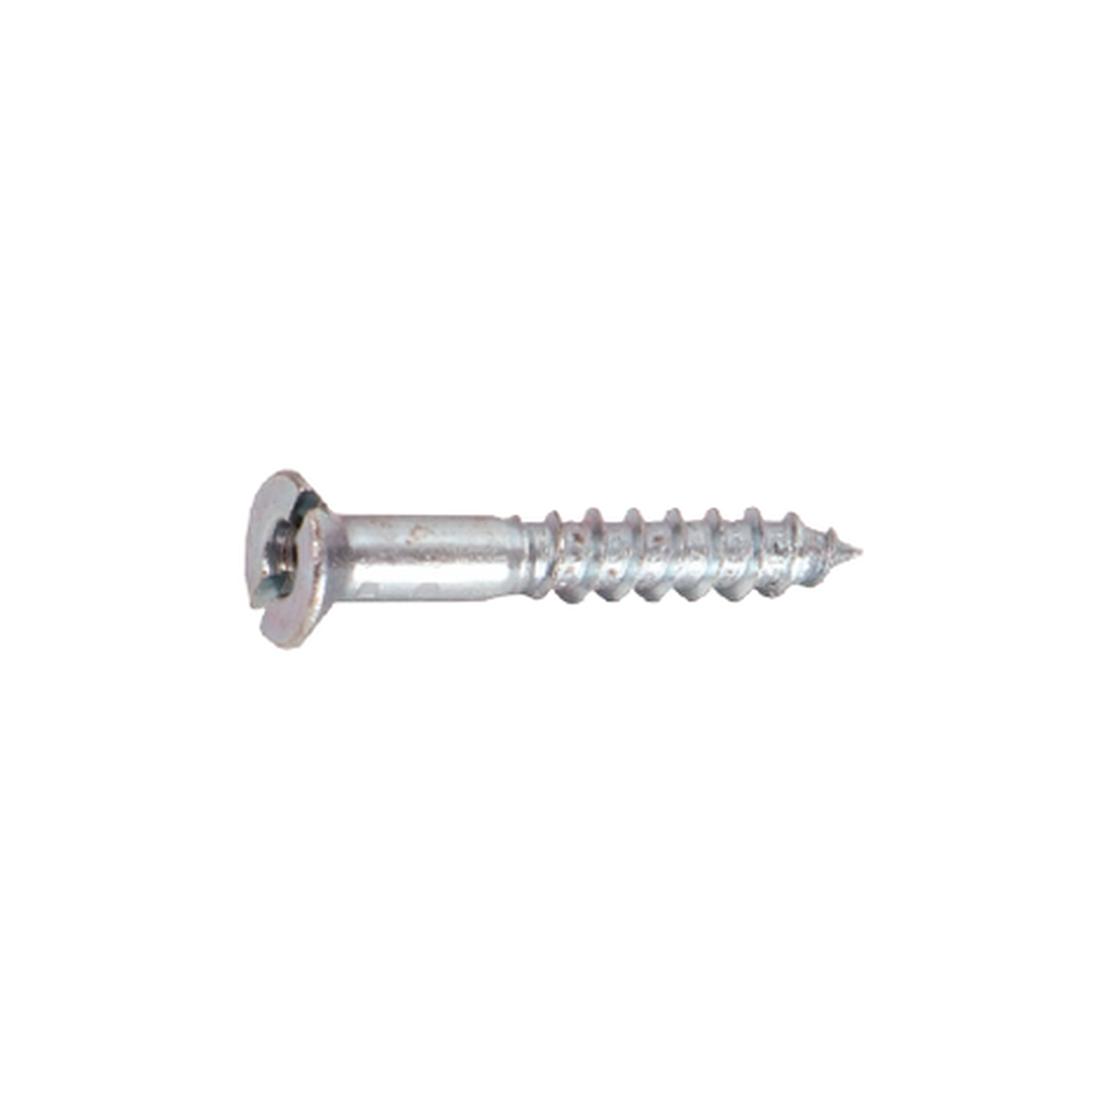 Countersunk screw for S112, length 30mm